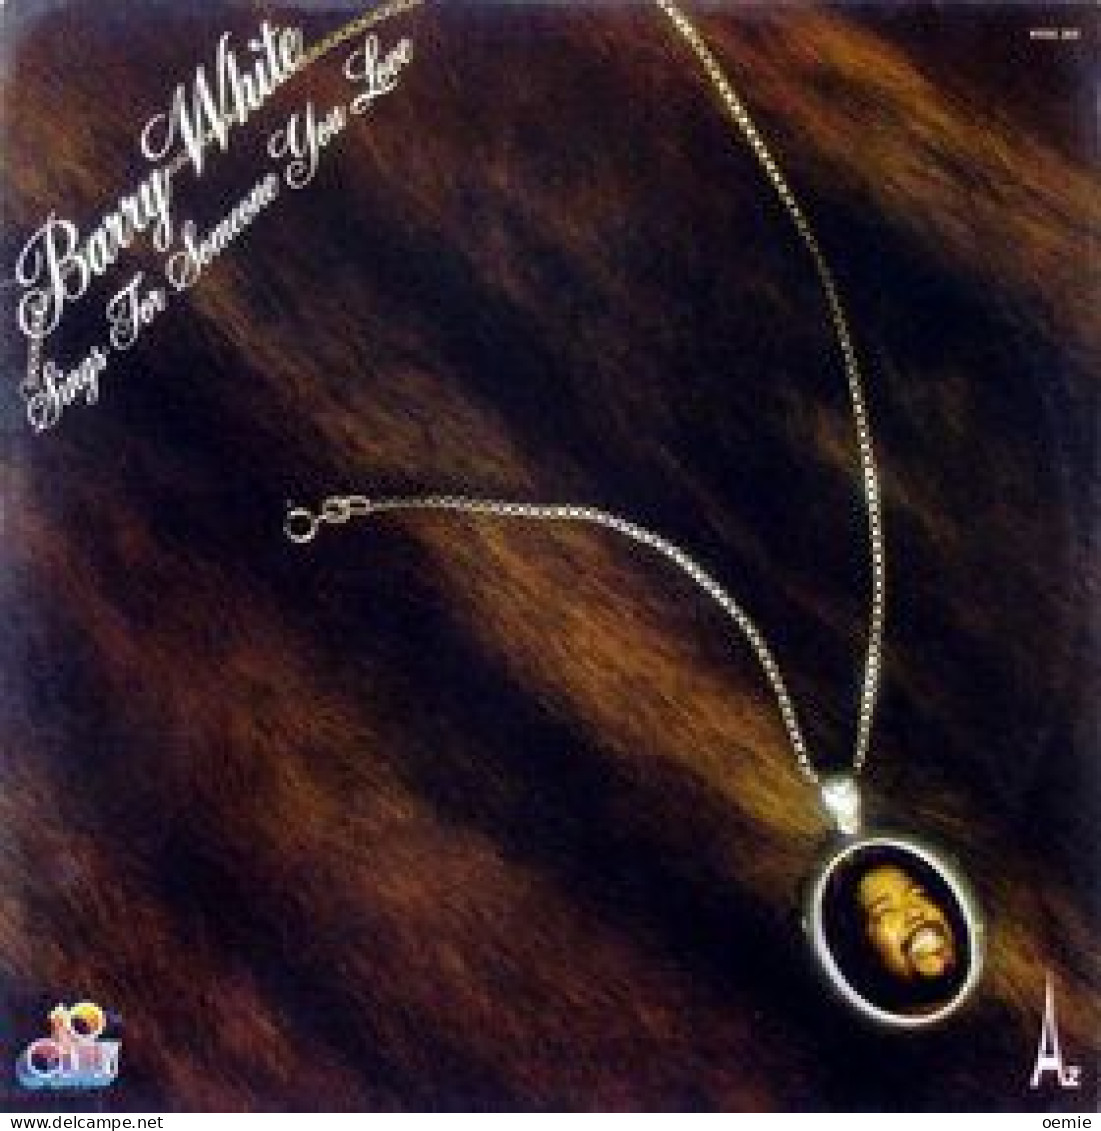 BARRY WHITE   SINGS FOR SOMEONE YOU LOVE - Autres - Musique Anglaise